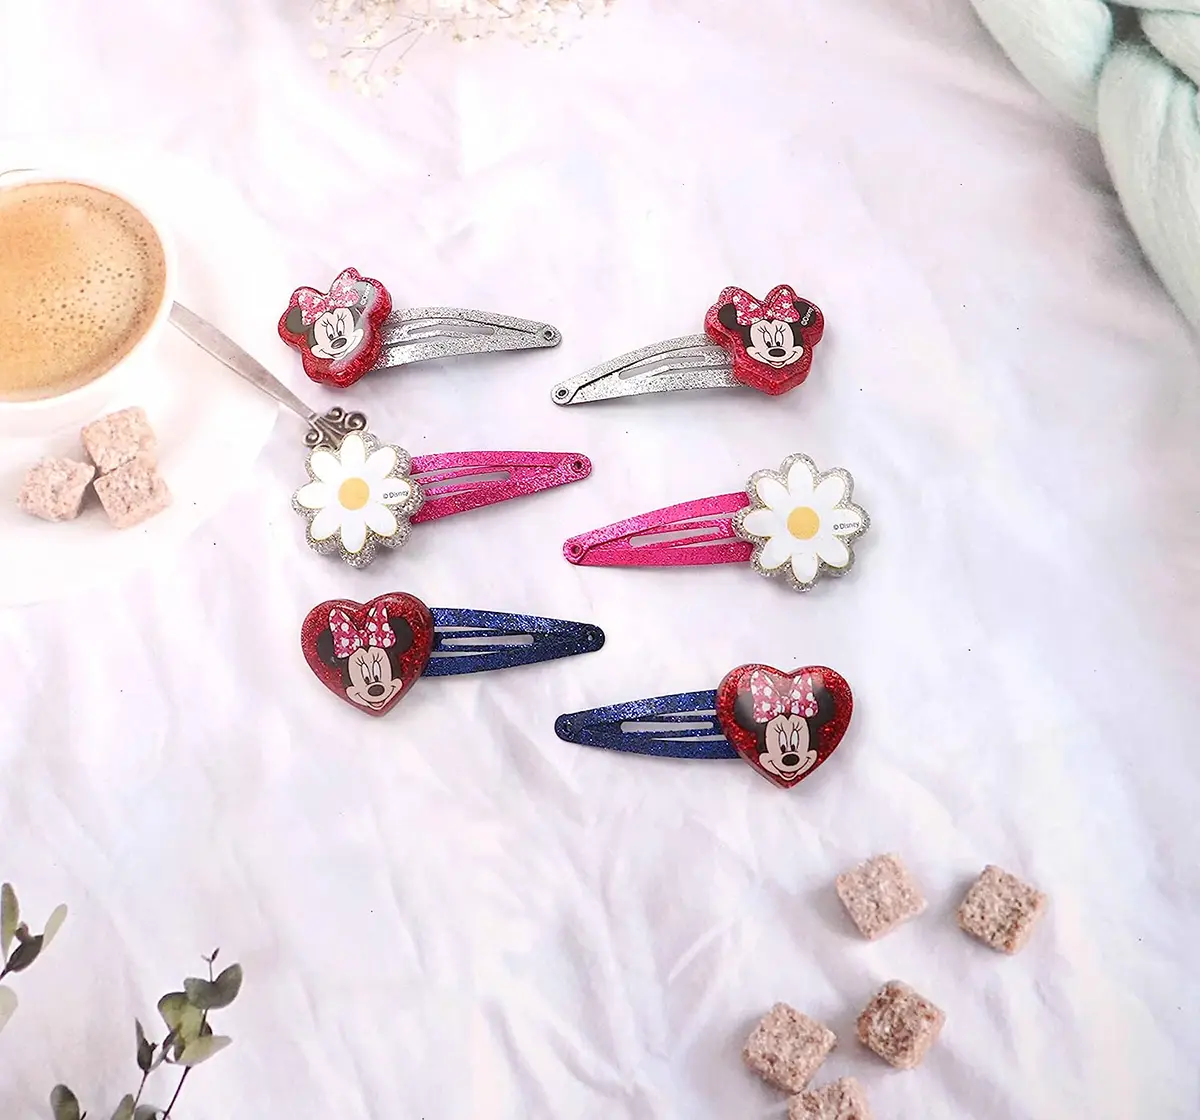 Li'l Diva Minnie Mouse Hair Clips Pack of 6 For Girls of Age 3Y+, Multicolour